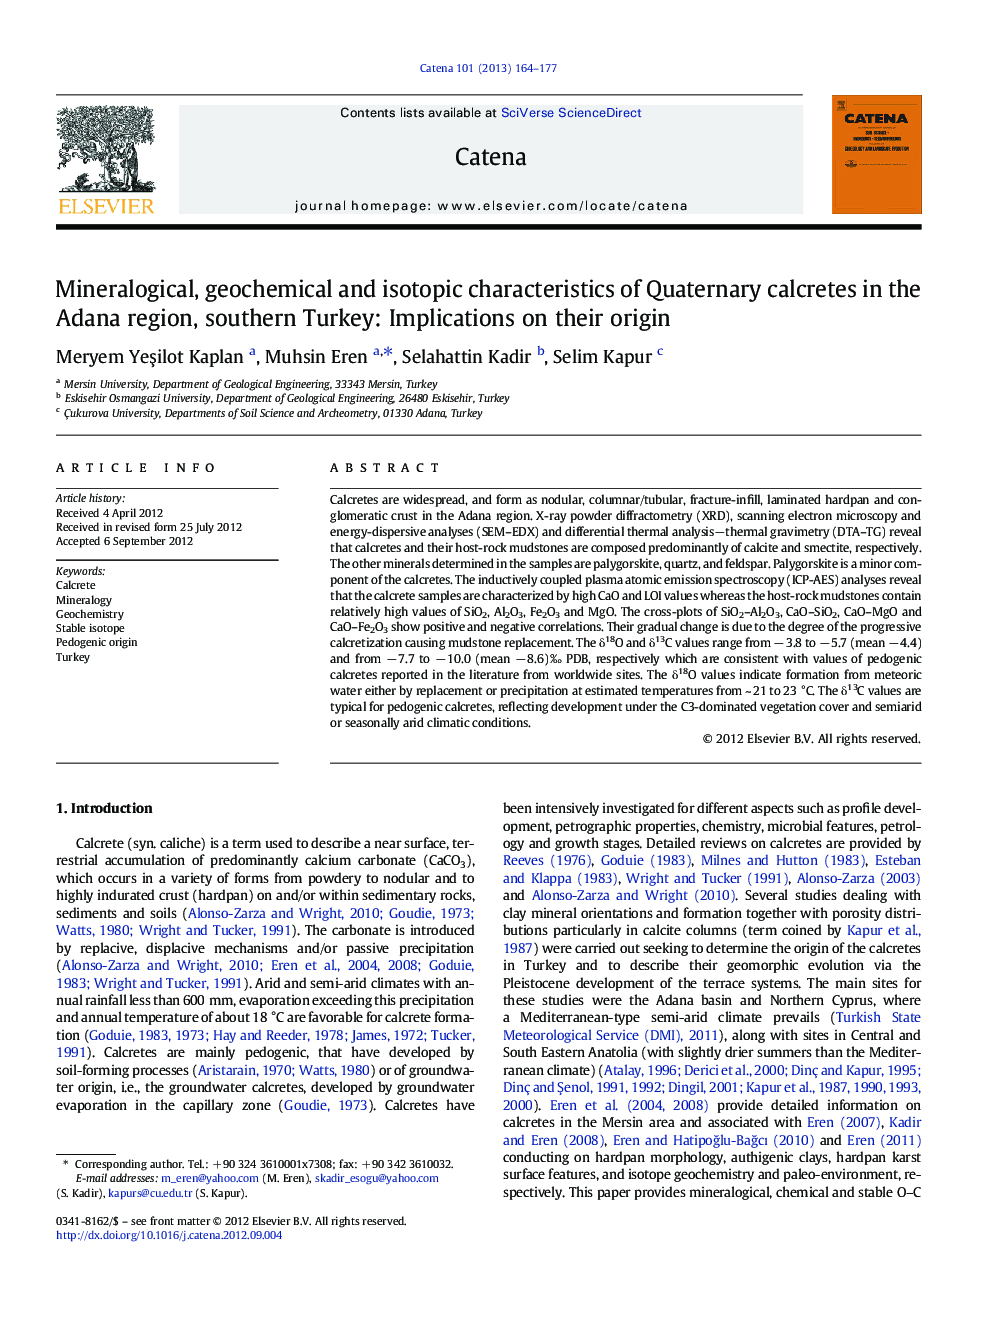 Mineralogical, geochemical and isotopic characteristics of Quaternary calcretes in the Adana region, southern Turkey: Implications on their origin